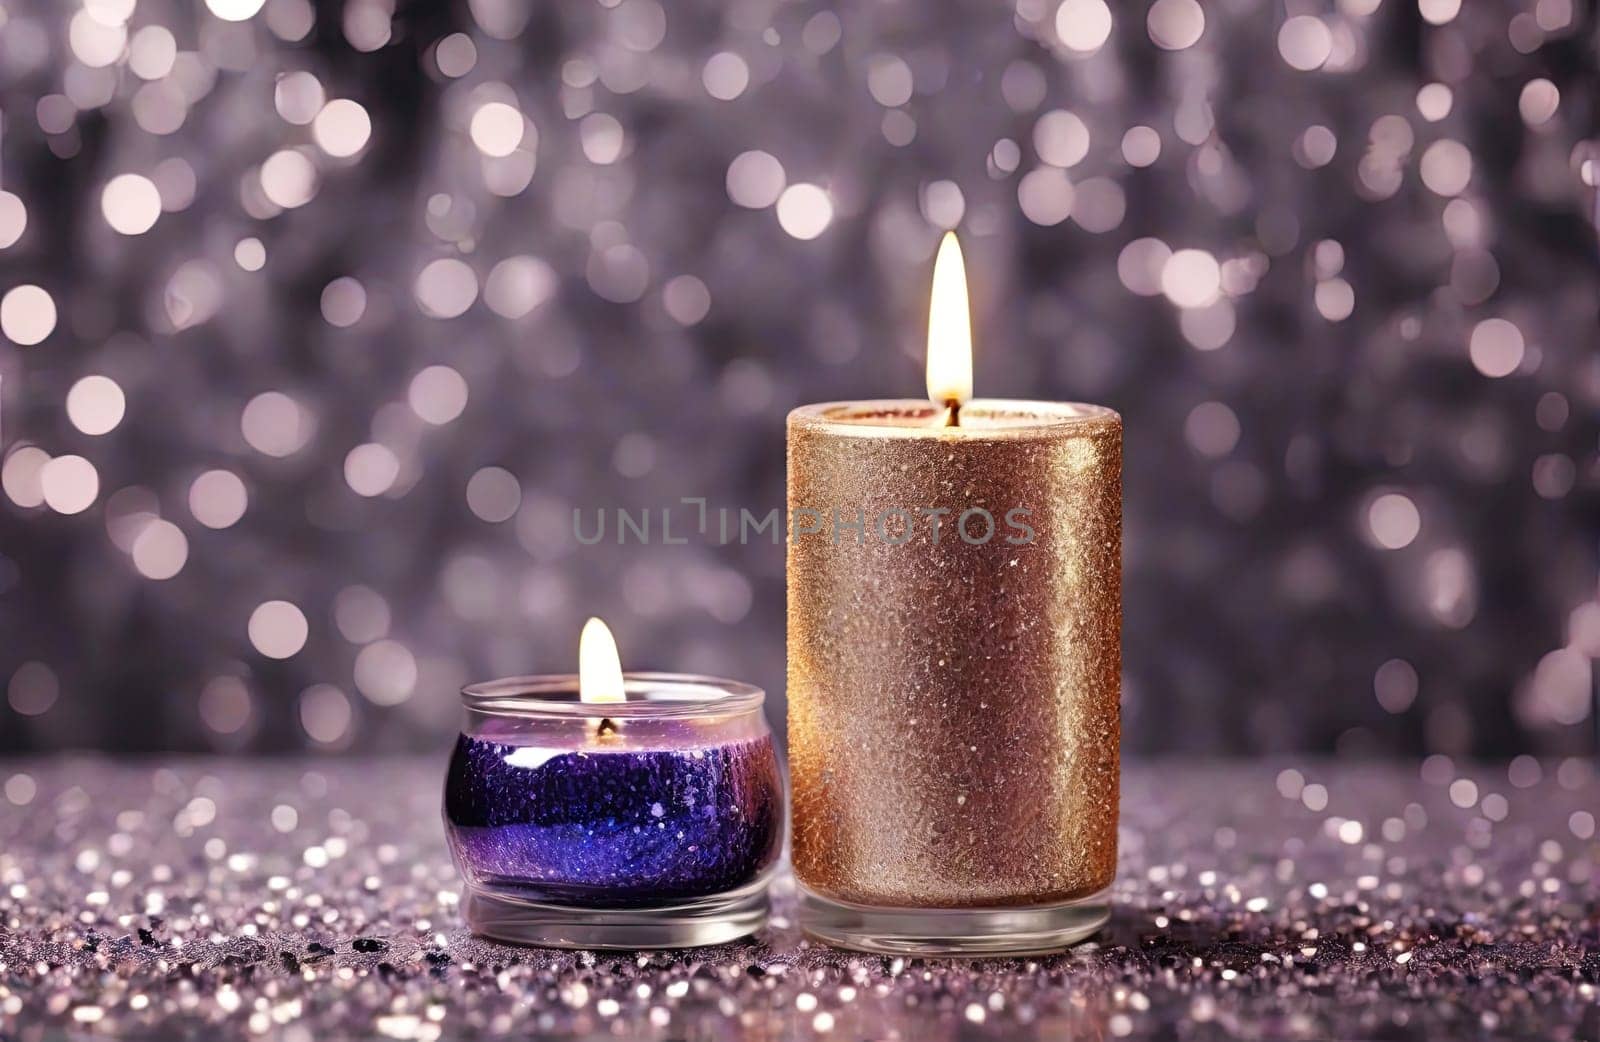 interior decor with burning candle. Luxury aromatic candles